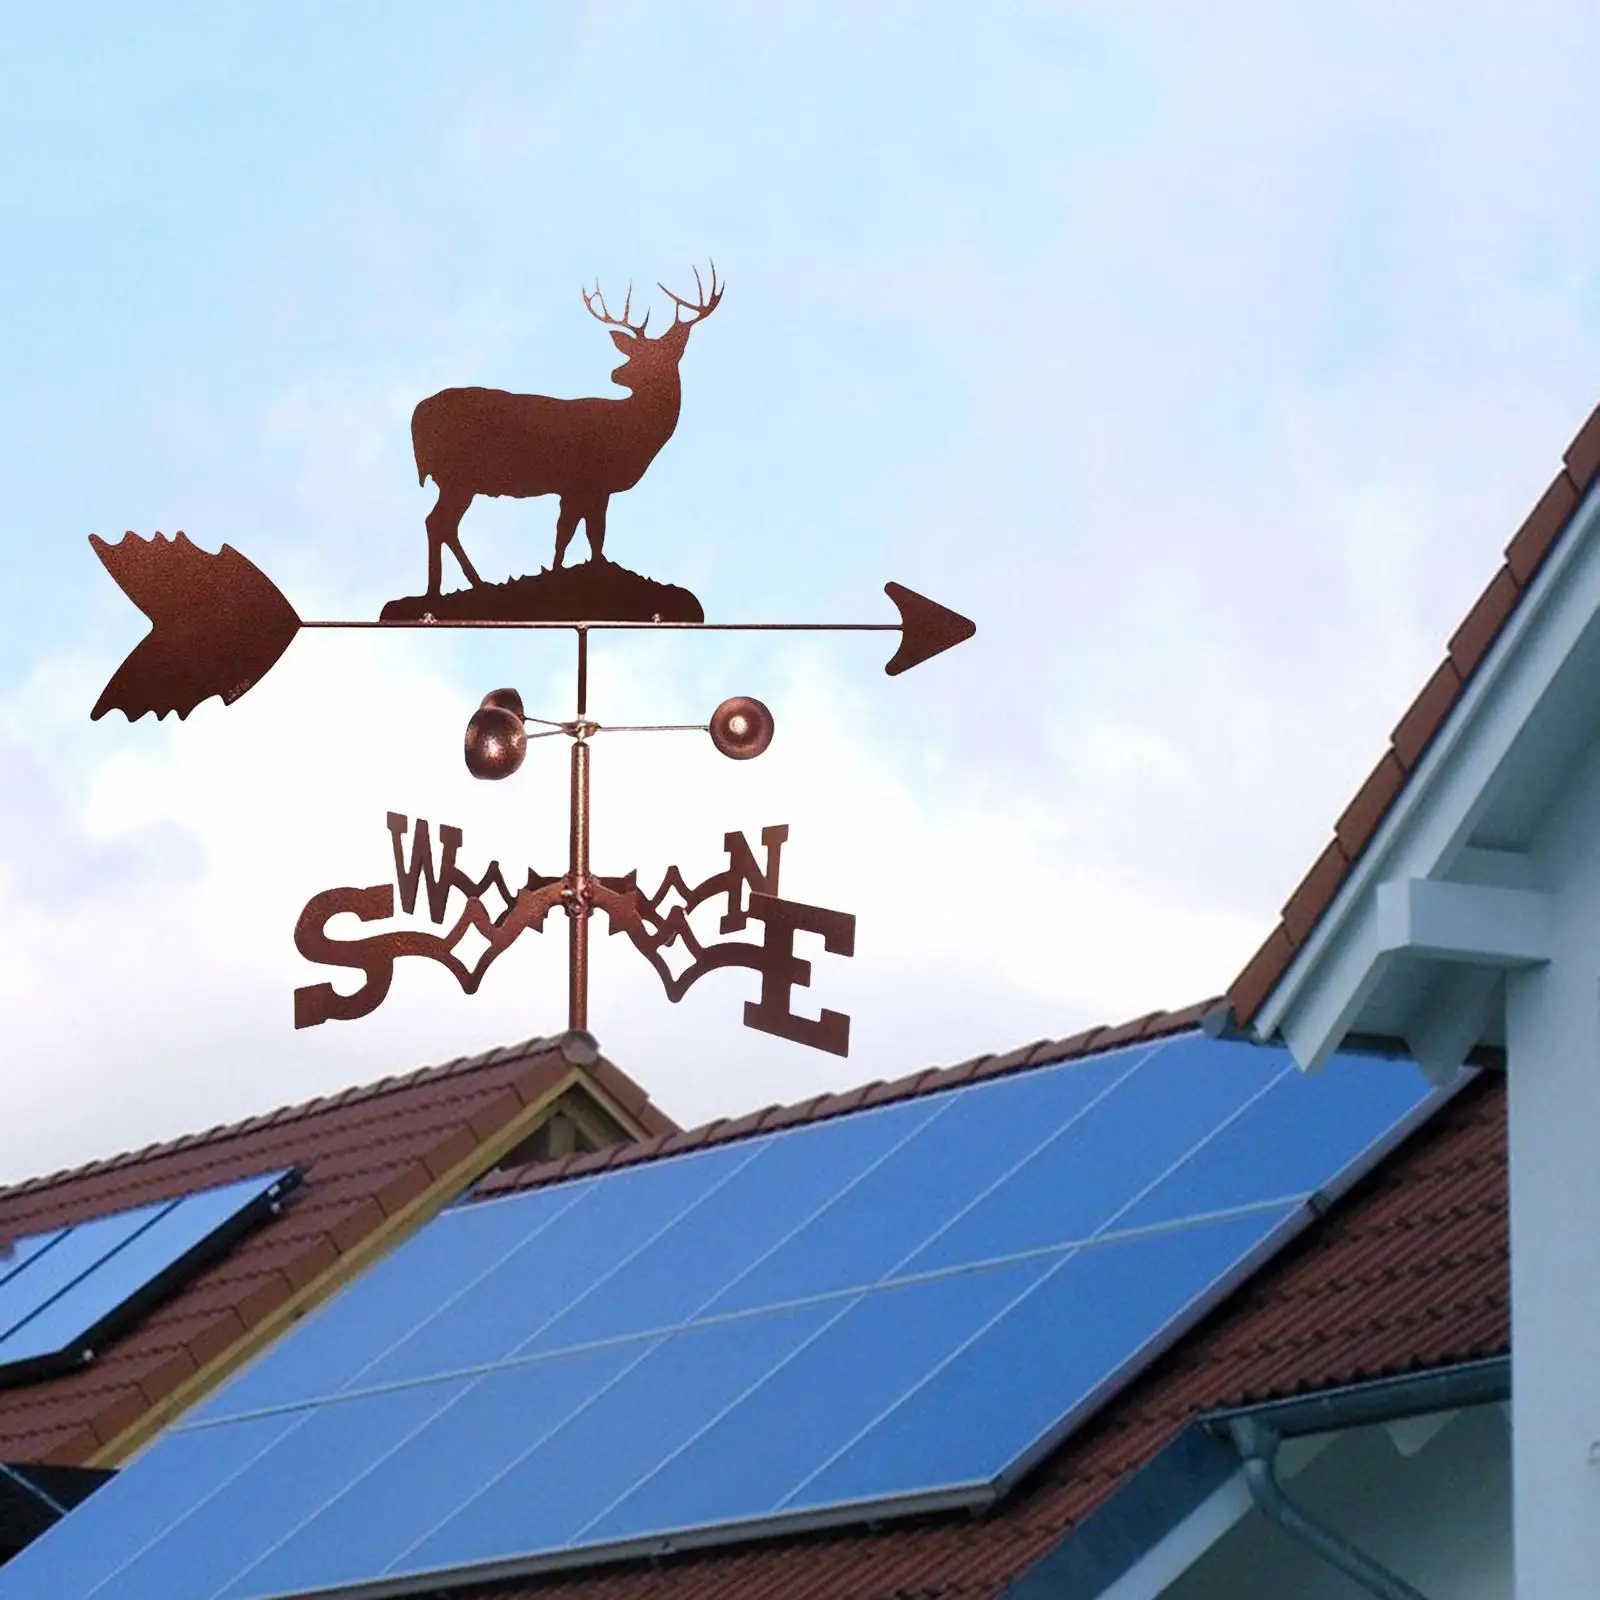 Classic Style Metal Weathervane Wind Direction Indicator for Garden Farmhouse Ornament